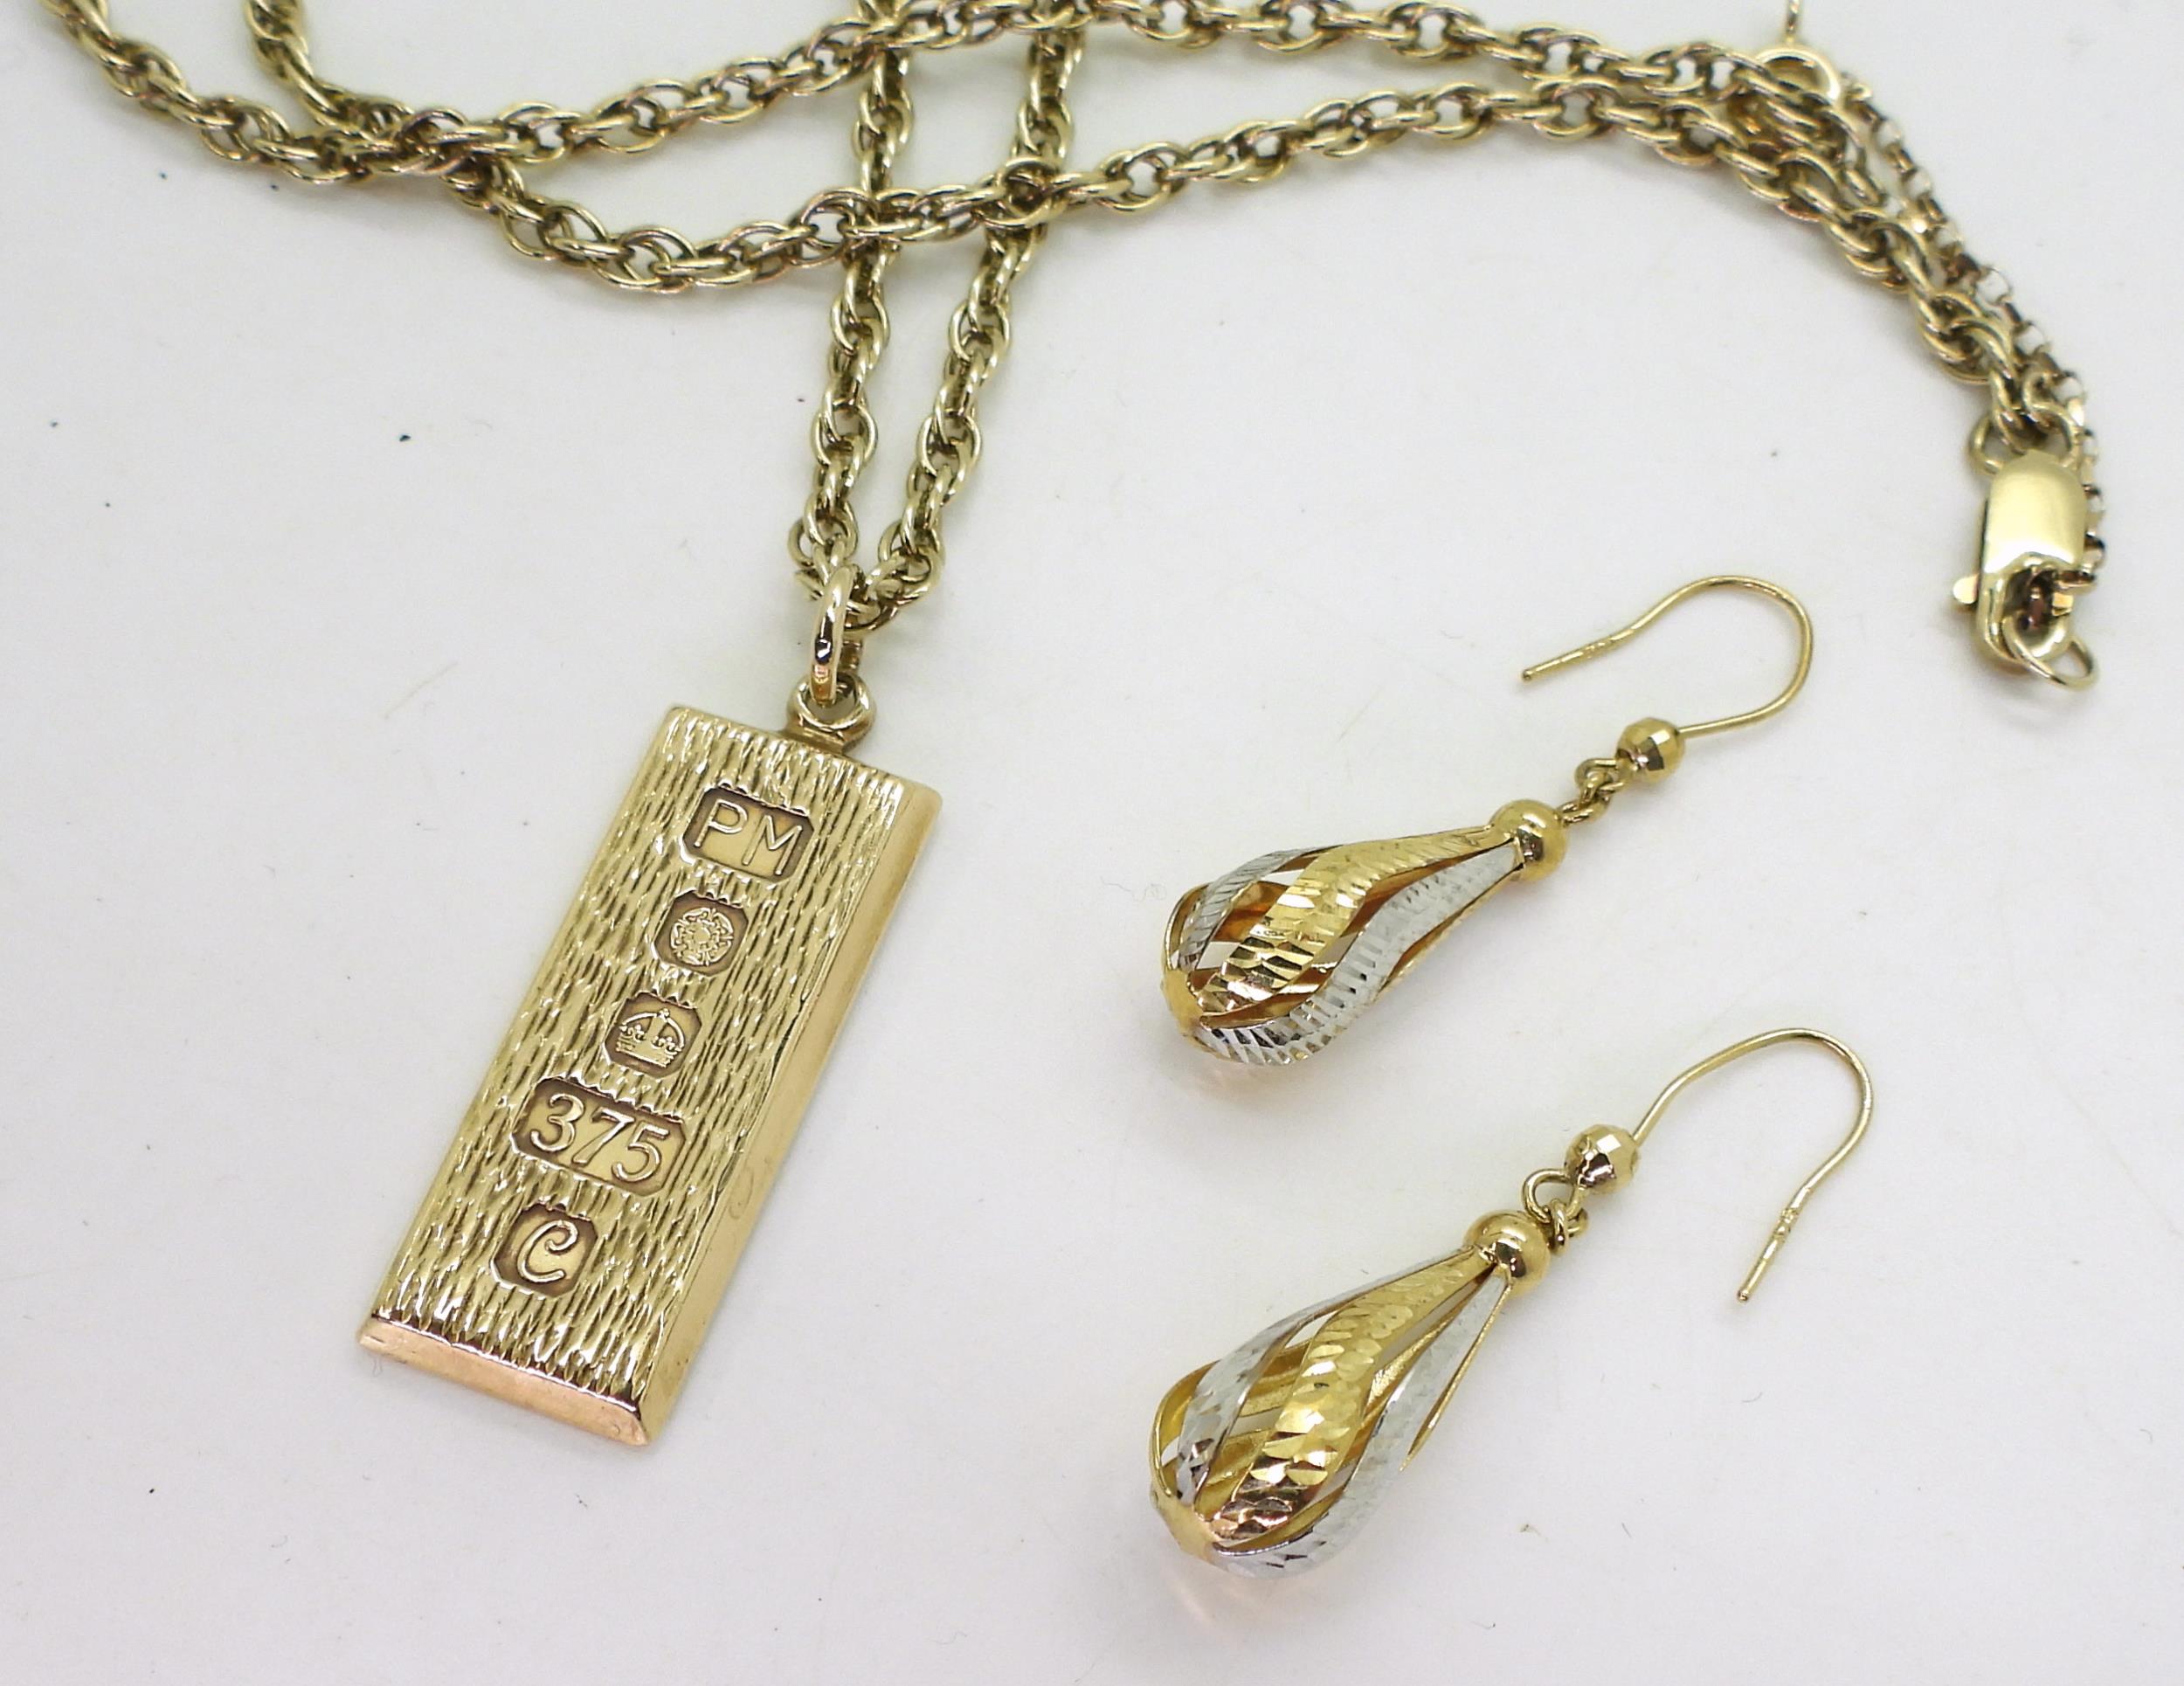 A 9ct gold ingot pendant and chain, and a pair of 9ct bi colour gold earrings, weight 21.6gms - Image 3 of 3